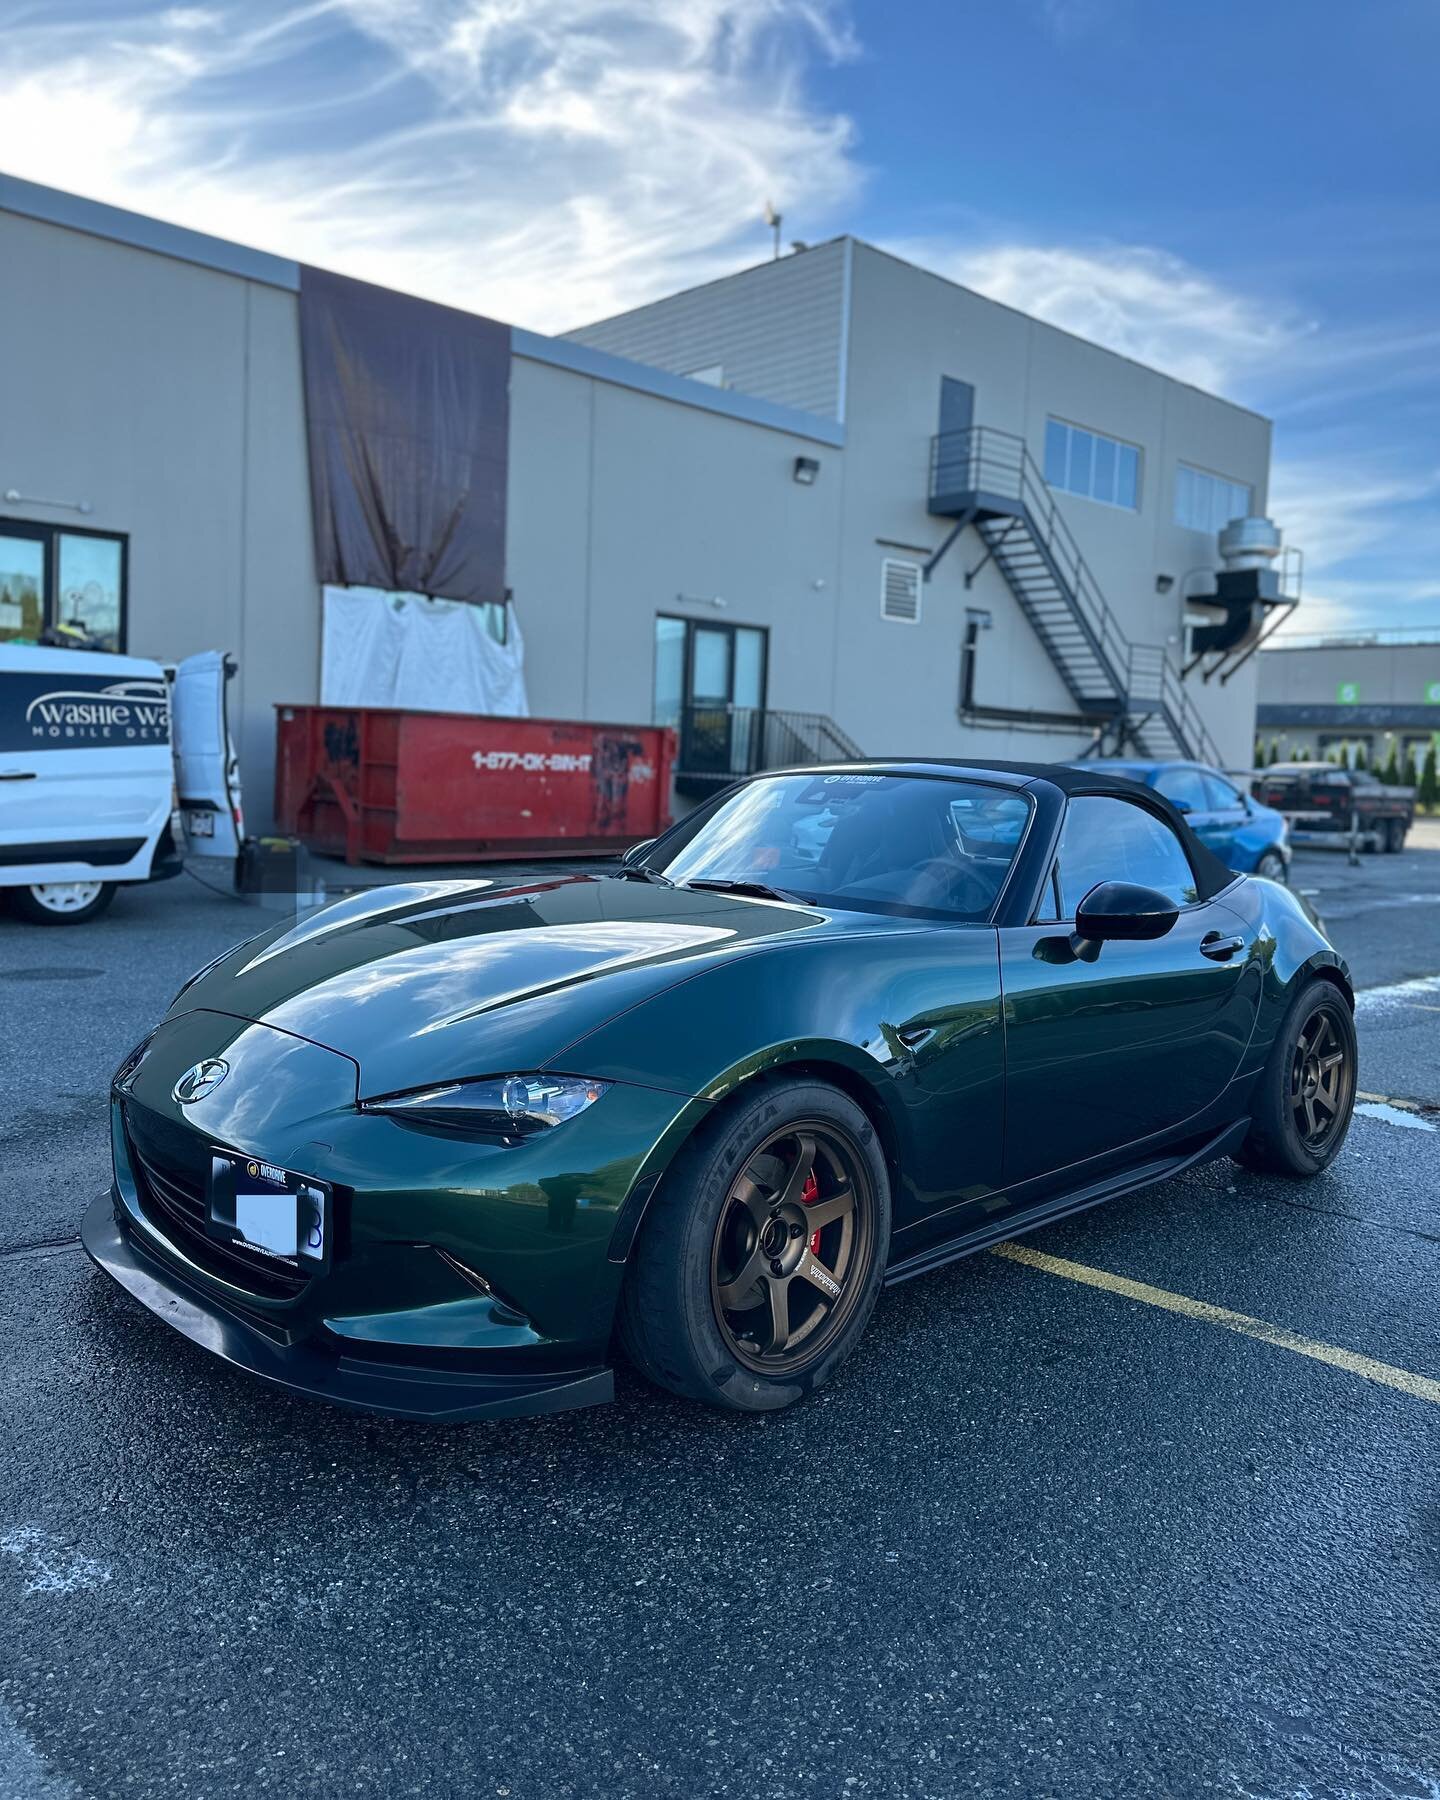 Mazda MX-5 ND2

Came in for our Maintenance Package ✅

After a long trek to @theridgemotorsportspark and back to Vancouver,  we removed bugs as well as accumulated tar from the track to bring this vehicle back to its former glory 🙌

For inquiries or